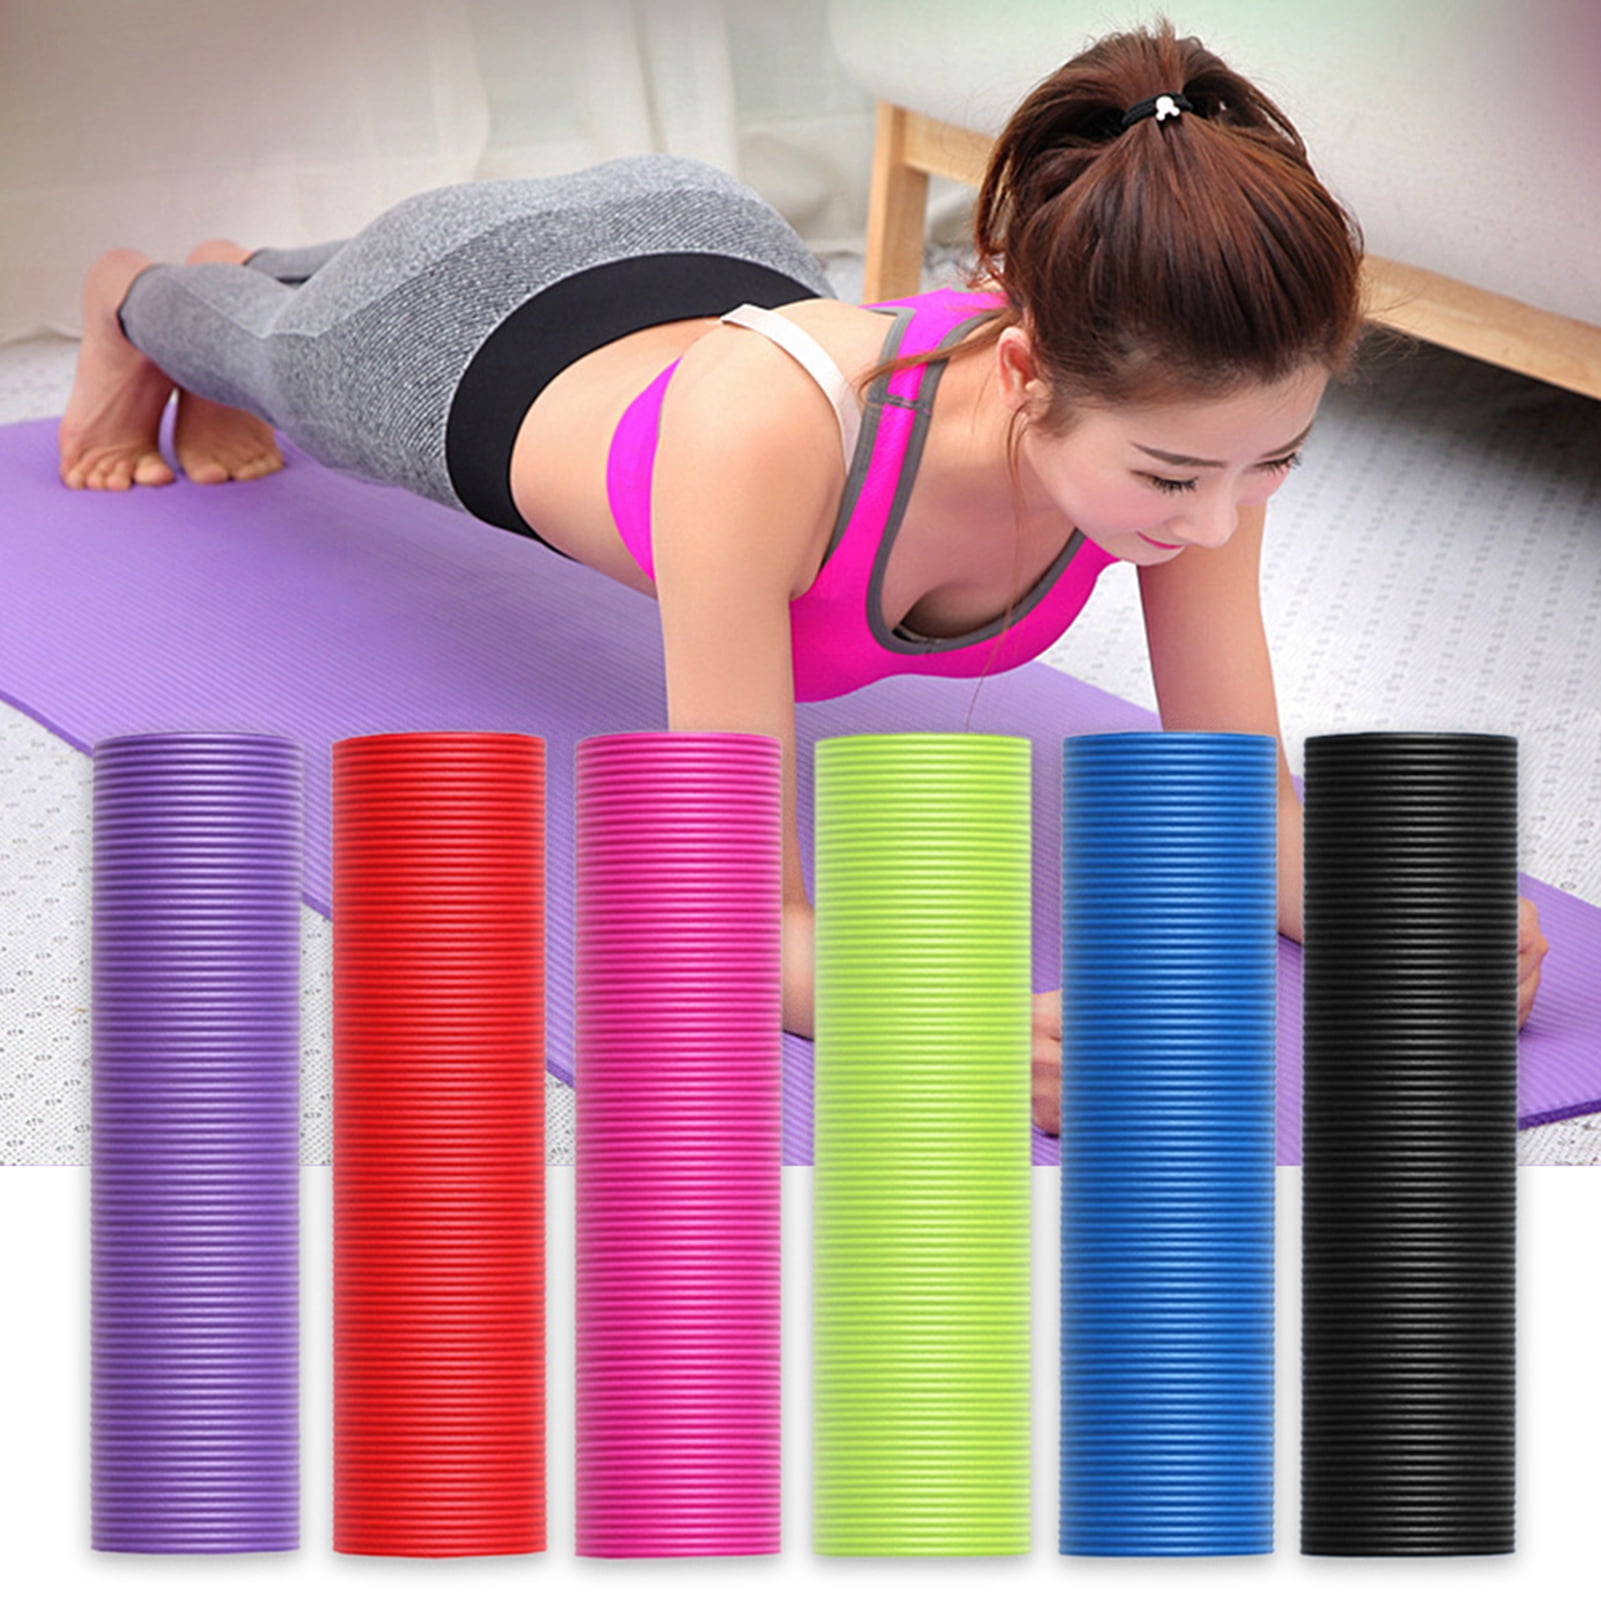 Extra Long Yoga-Mat"183cm x 61cm"Fitness Camping Pilates with Strap Bag*Exercise 